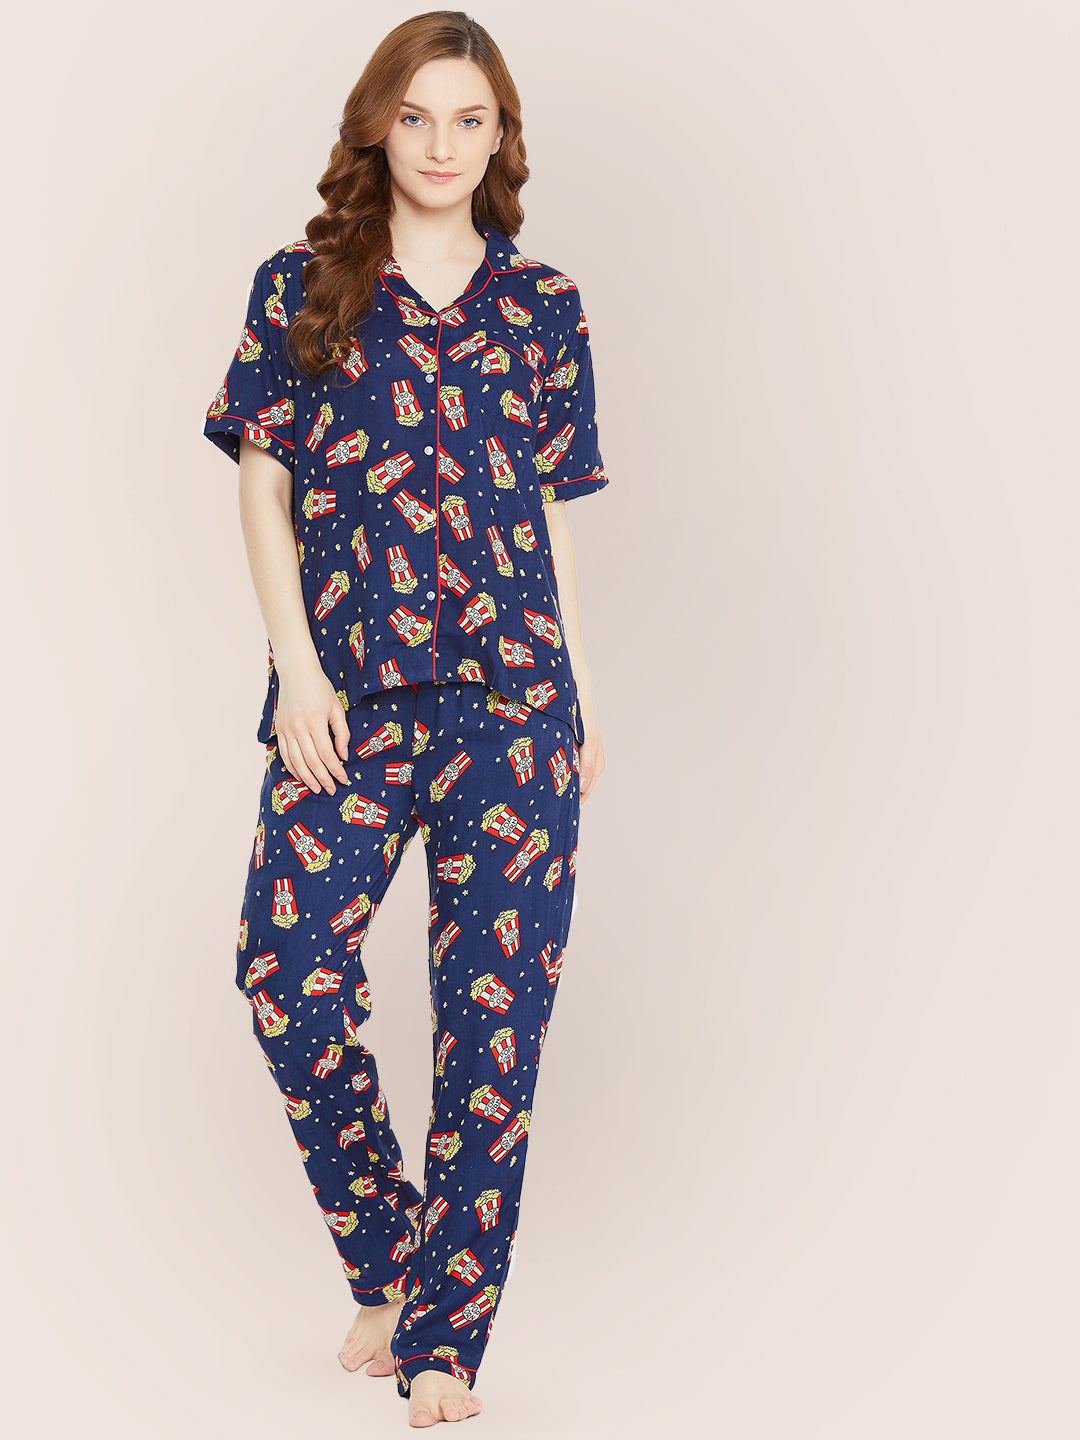 Cotton Printed Ladies Night Suit, Size: XL at Rs 410/piece in